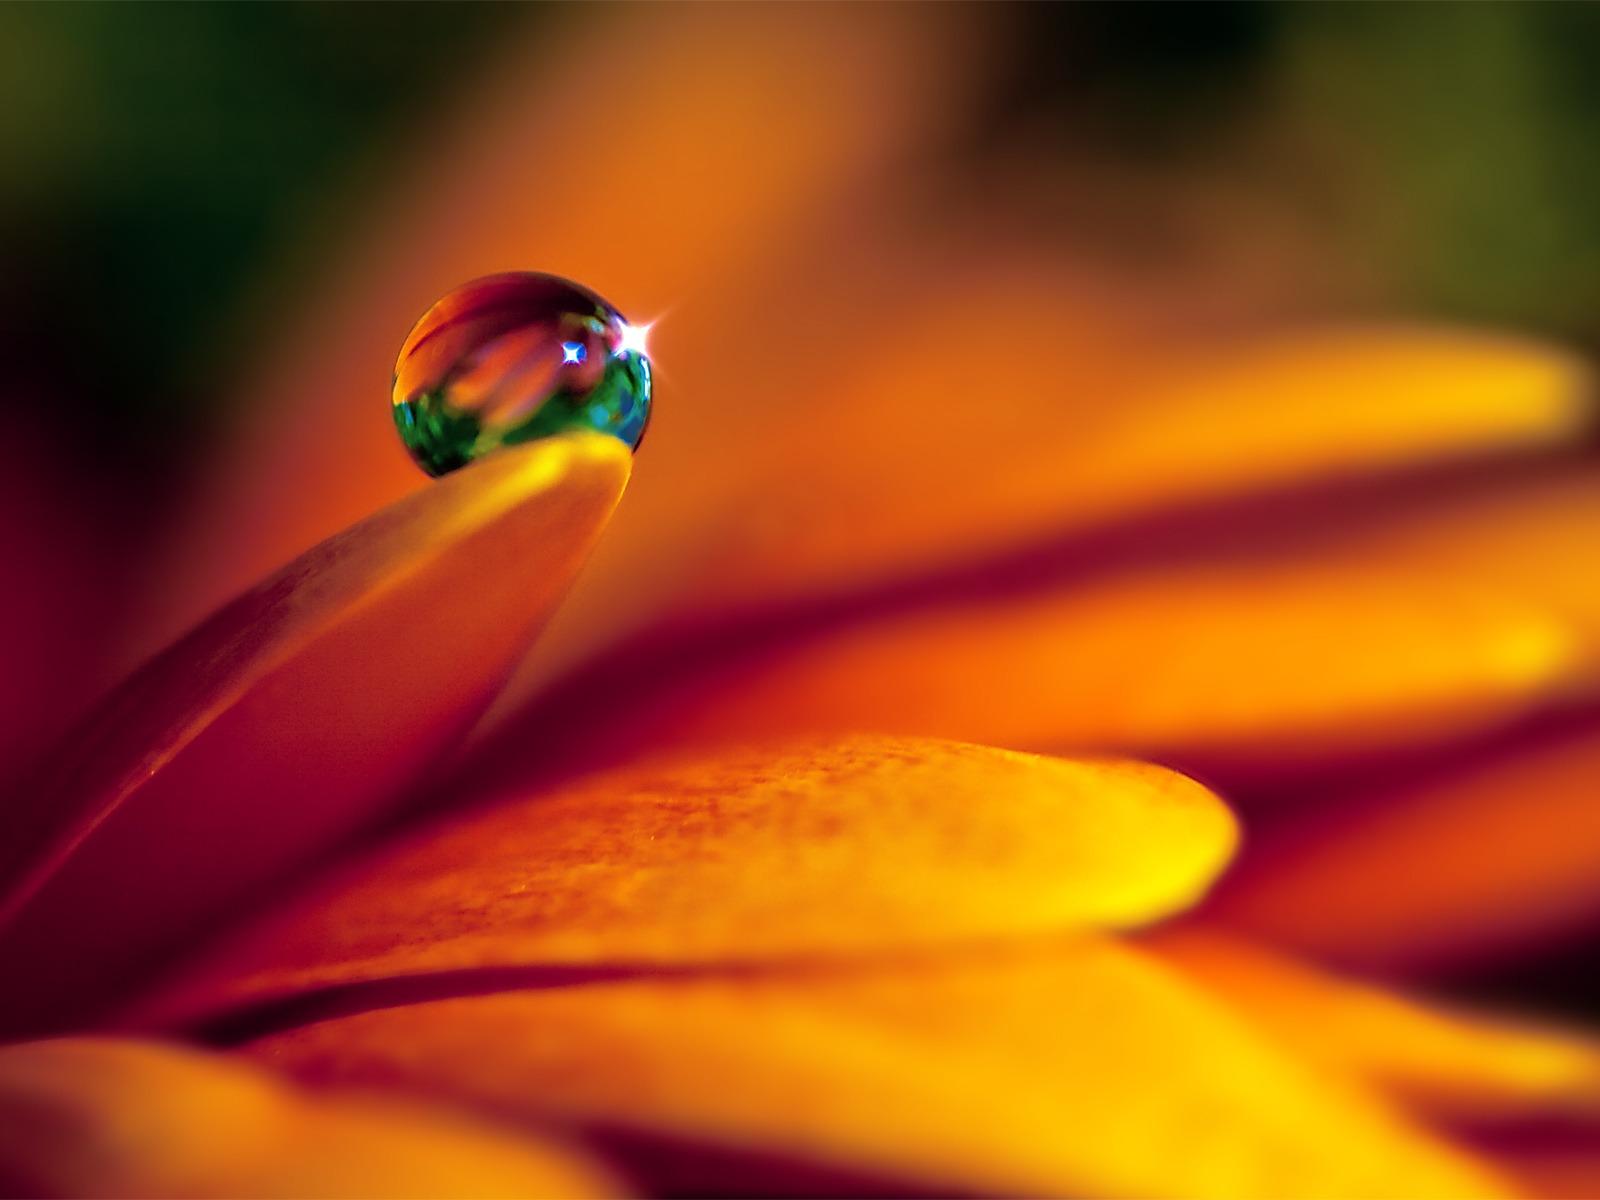 Close_up_waterdrop_on_flower_cb_wp8